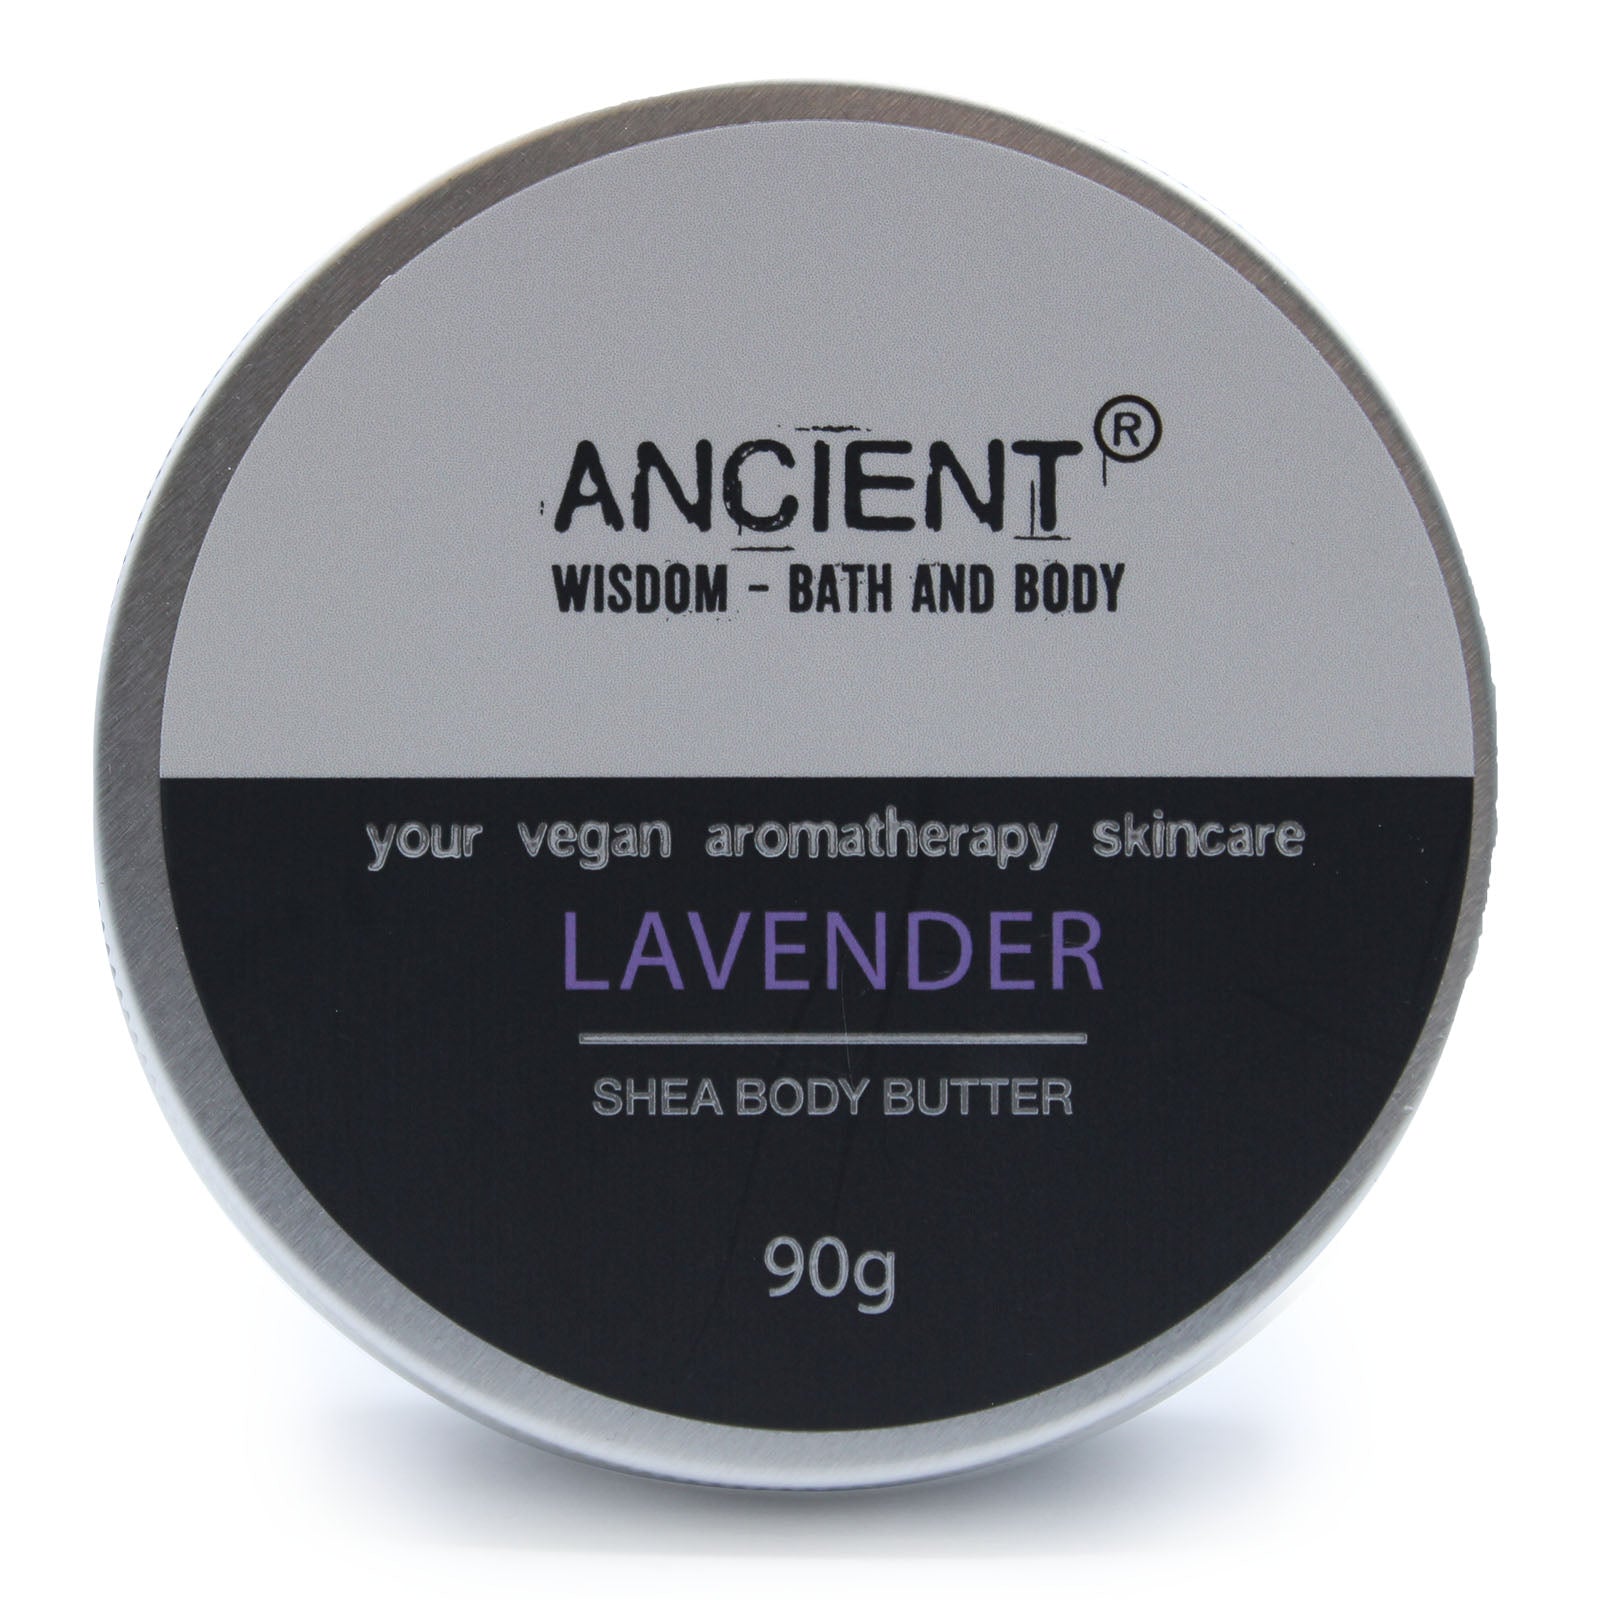 View Aromatherapy Shea Body Butter 90g Lavender information